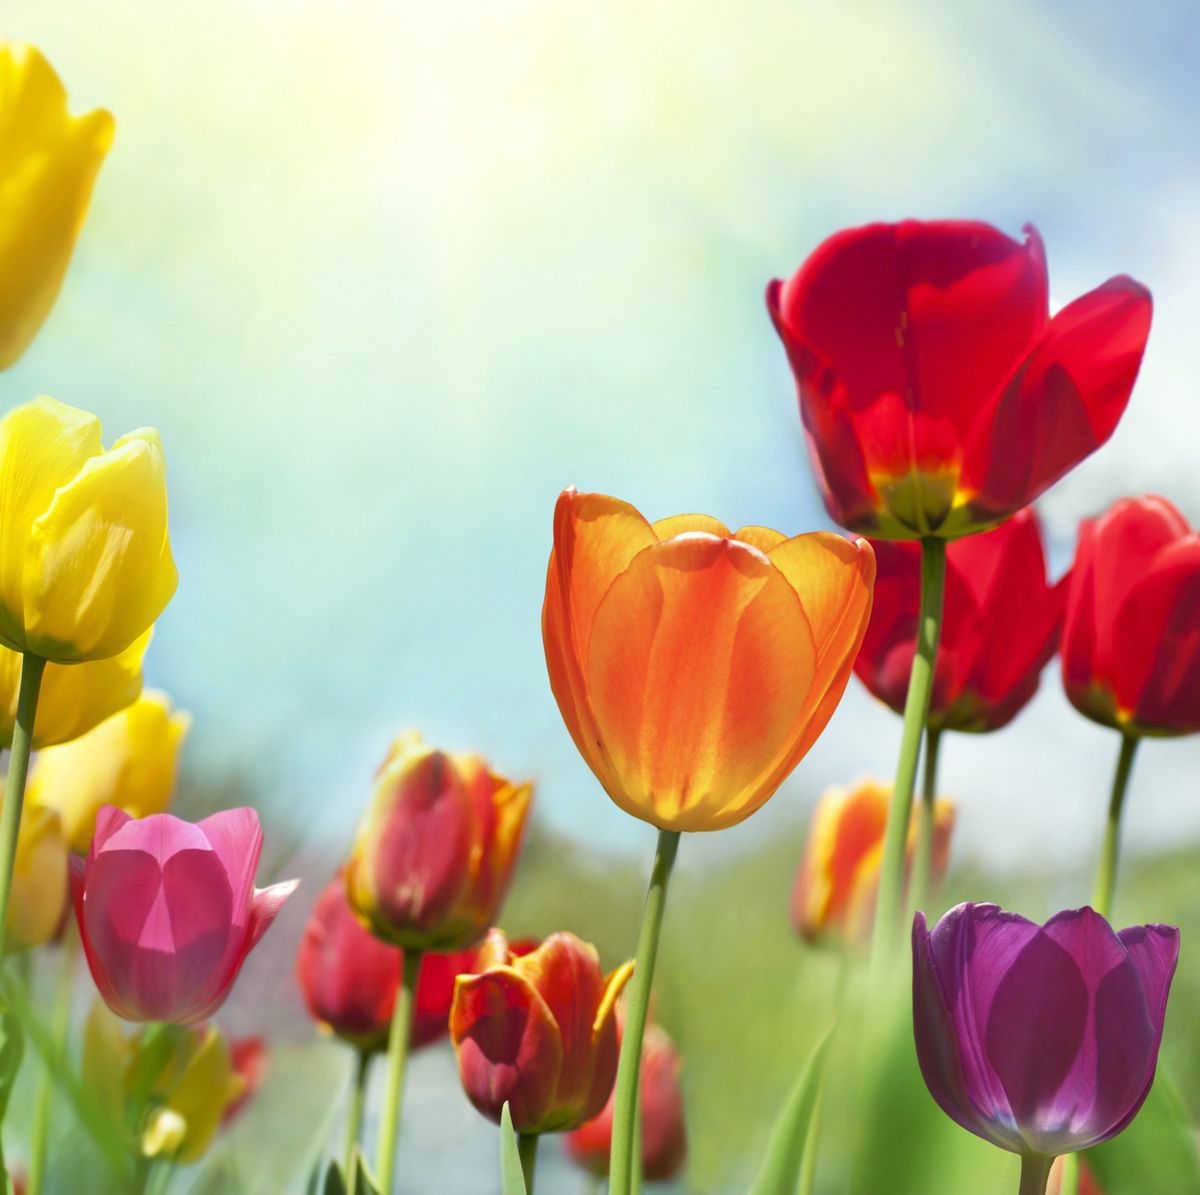 When to Plant Tulip Bulbs for Spring - How to Plant Tulips